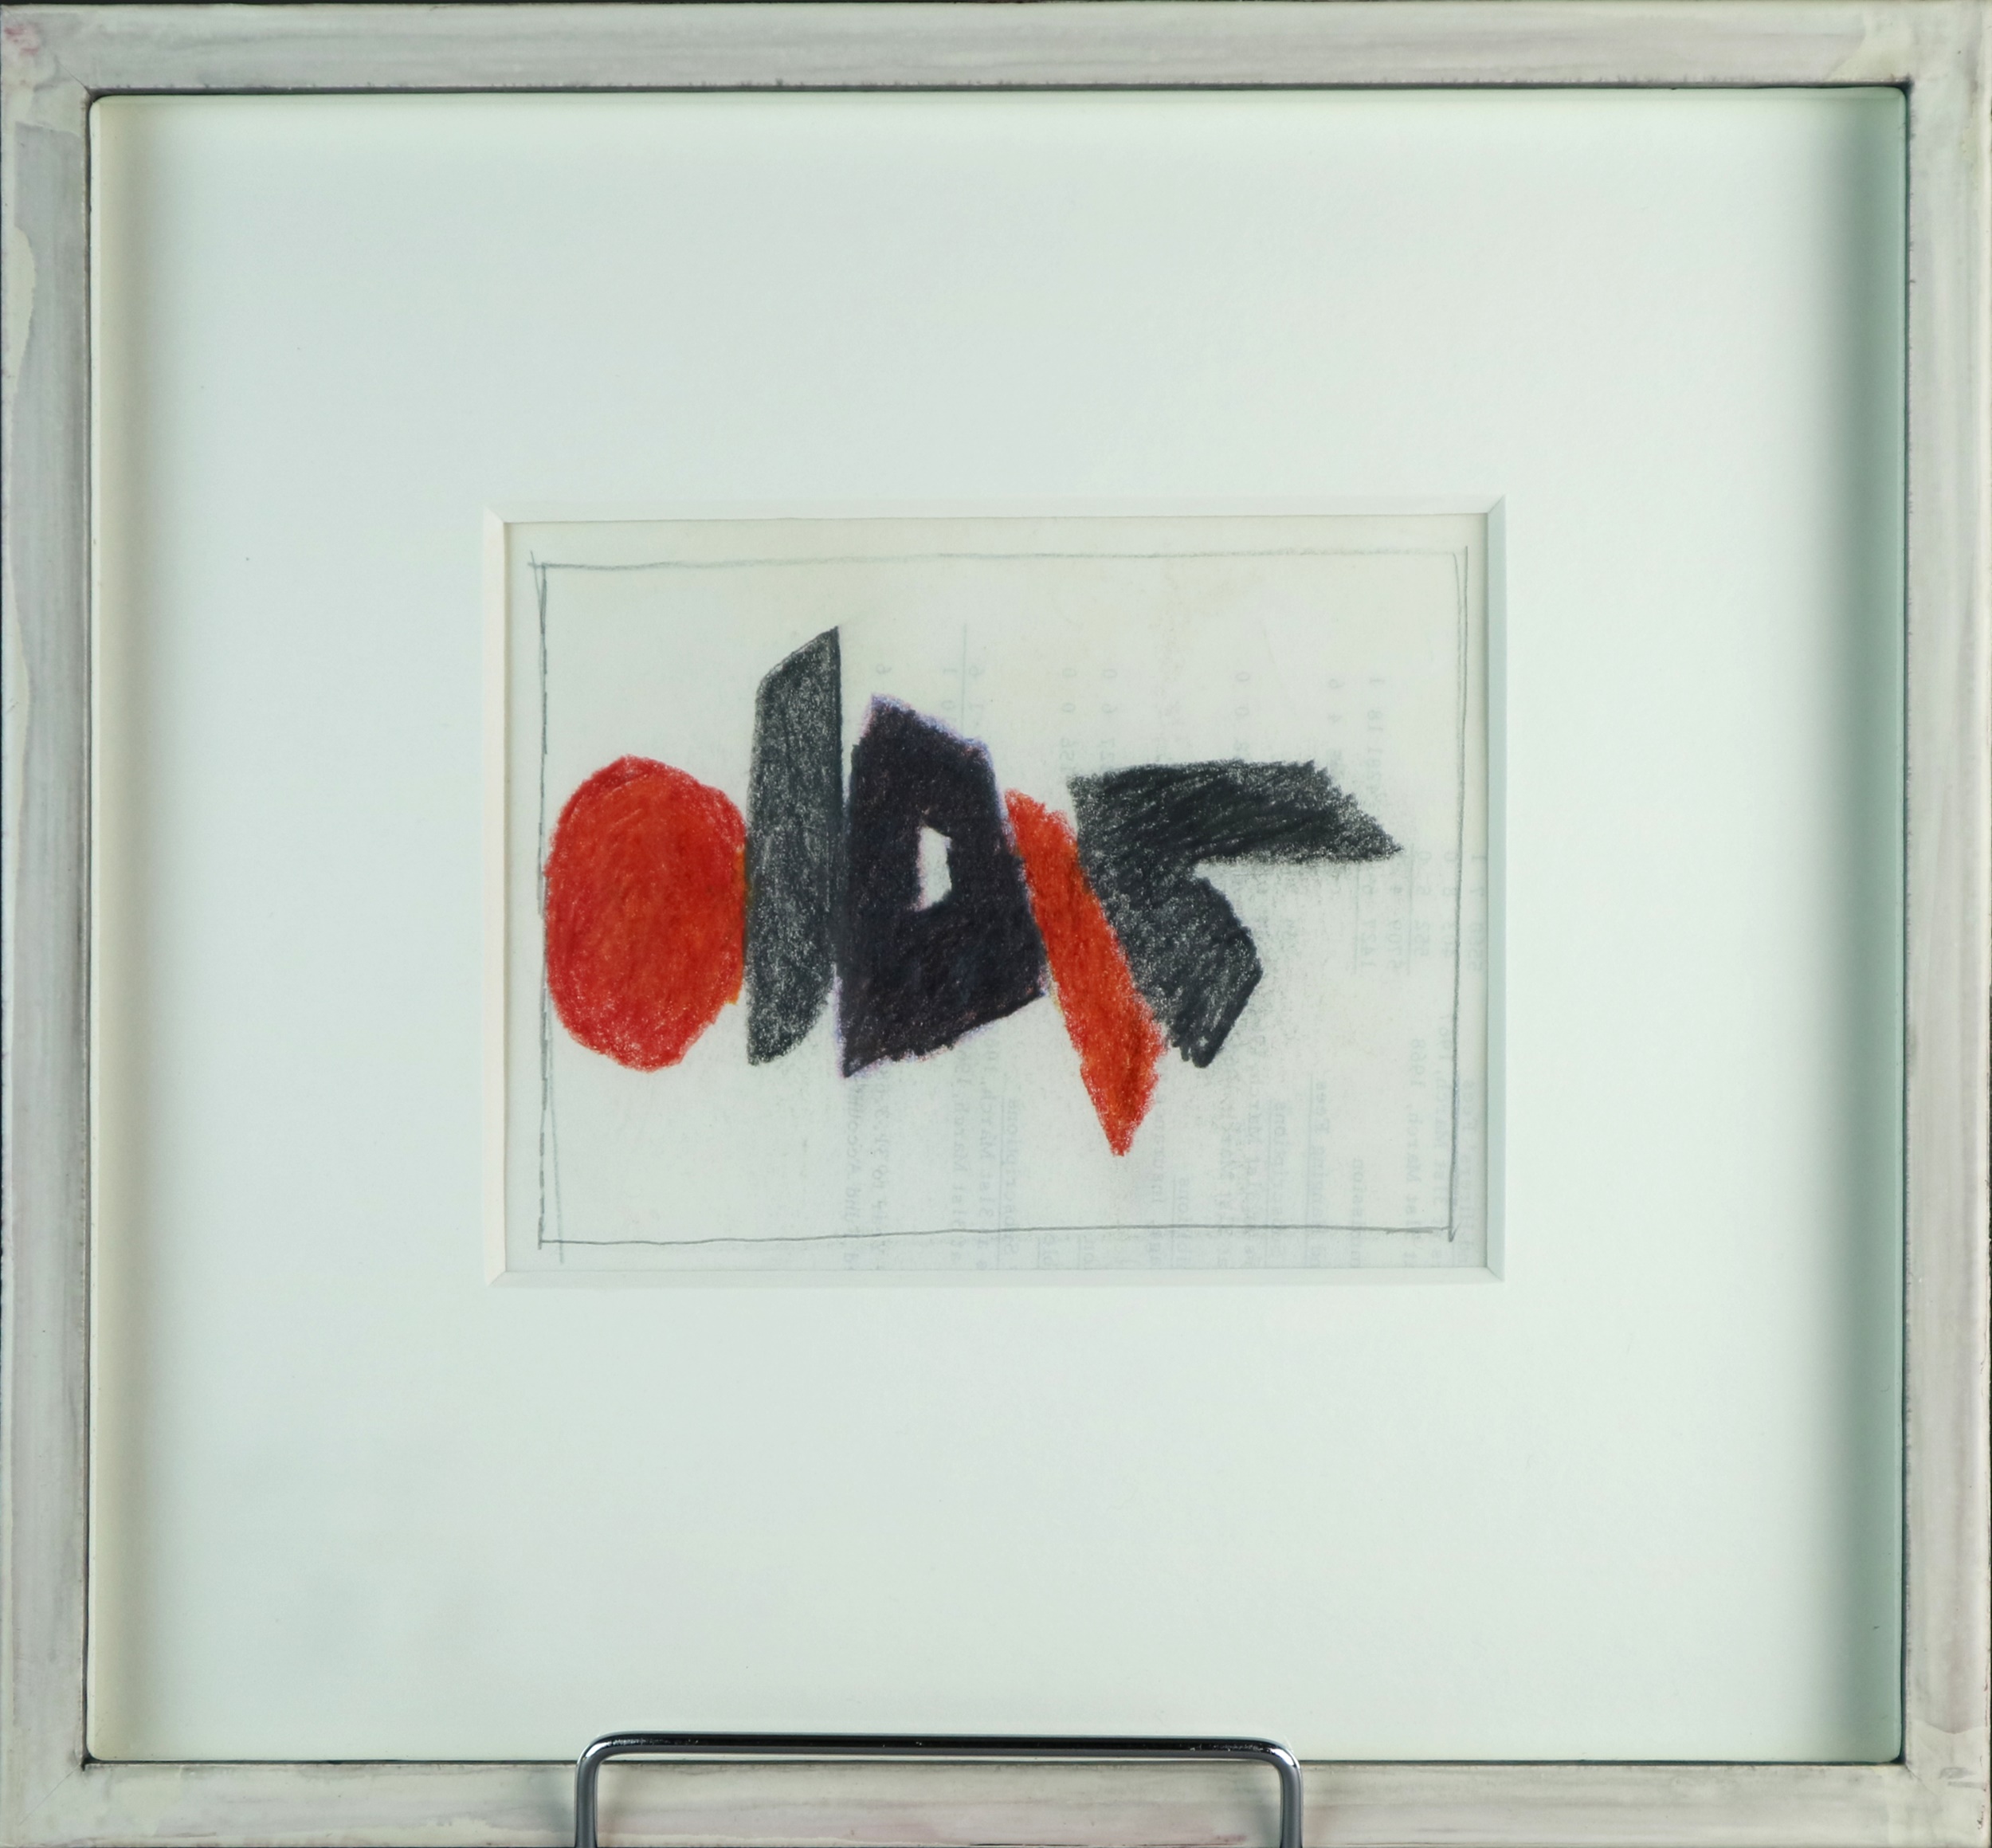 Bernard Farmer (British 1919-2002) Red and Black Abstract, pencil and crayon, measurements 10 x 13.5 - Image 3 of 5